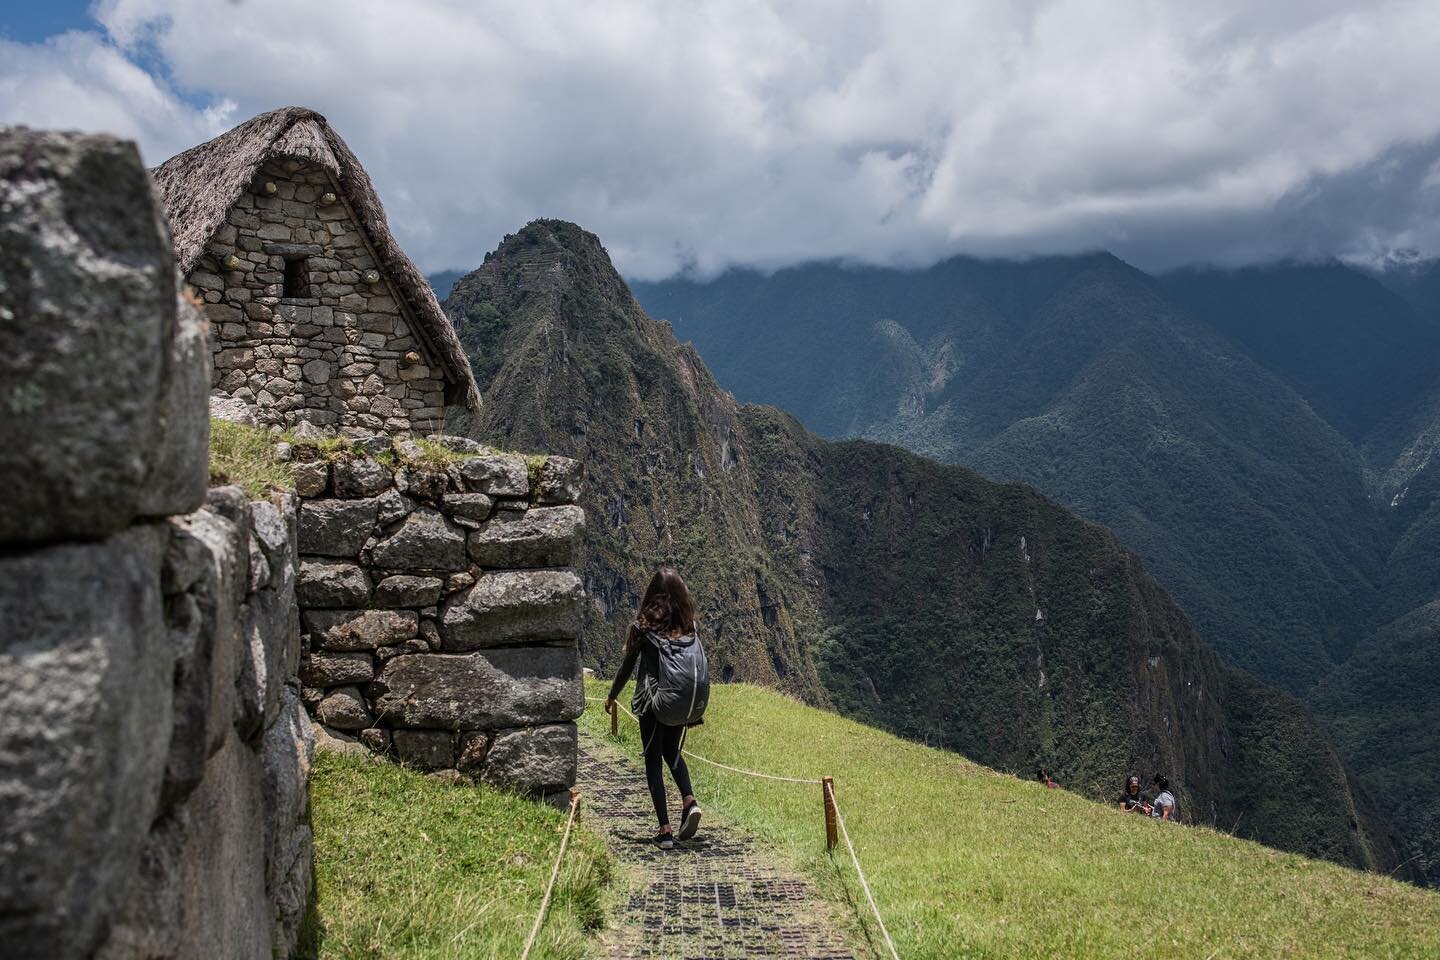 Exploring Machu Picchu, one year ago today. I&rsquo;m itching to get back out there again! .
.
.
.
.
#getoutside  #ilovetraveling #travelwithkids #adventureparenting #amazingplaces #kidswhotravel #explore #sixexplorers #roamearth #travelgram #roamthe